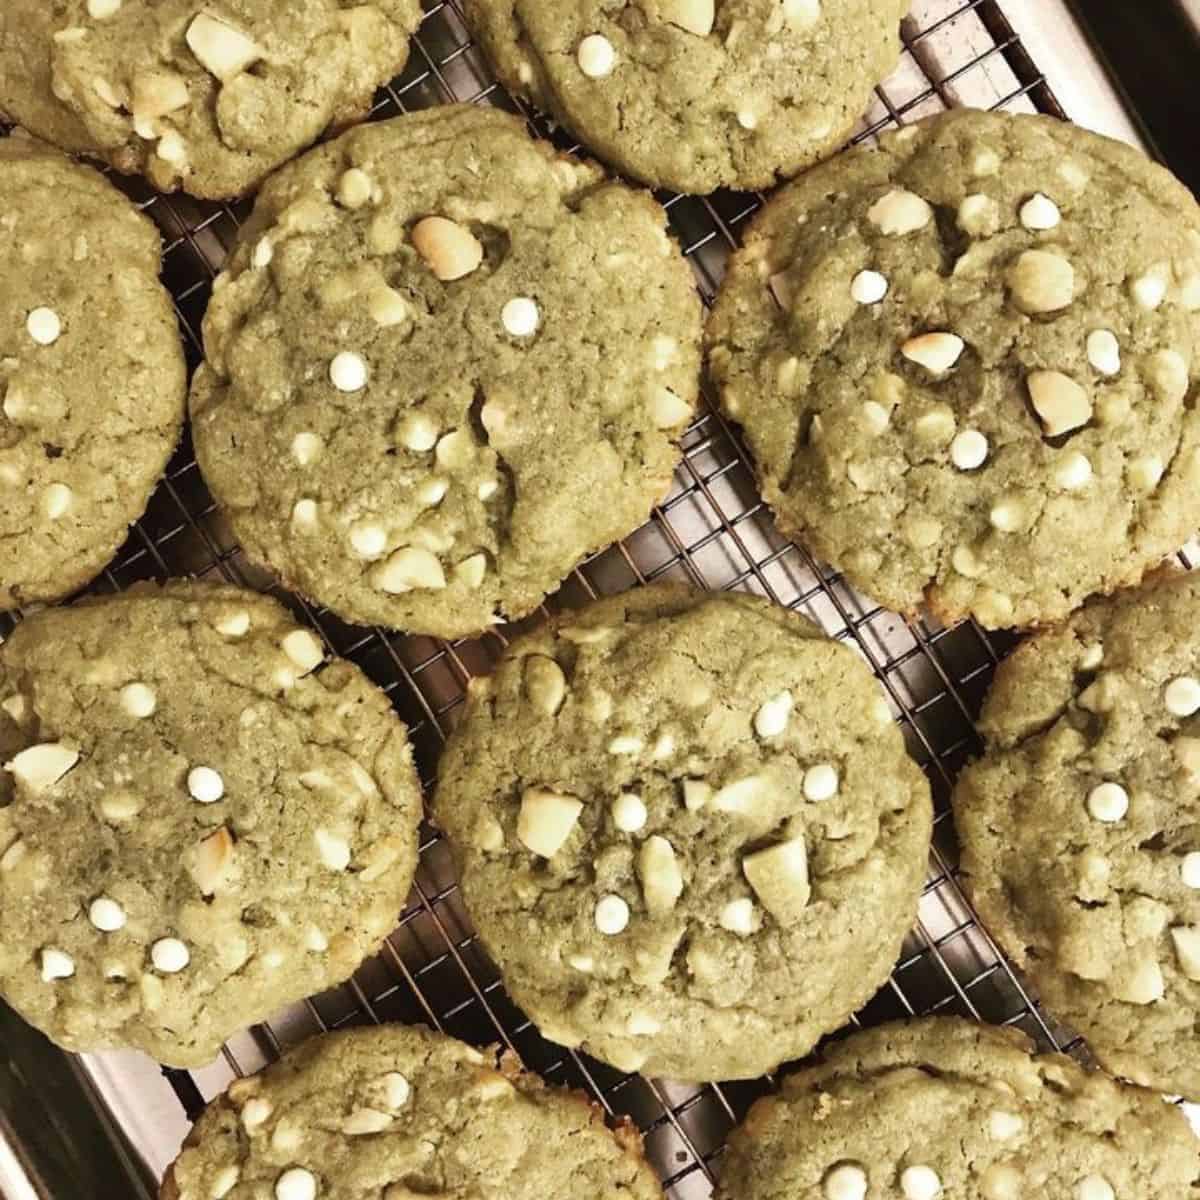 Delicious green tea treats mixed with hazelnuts and white chocolate chips